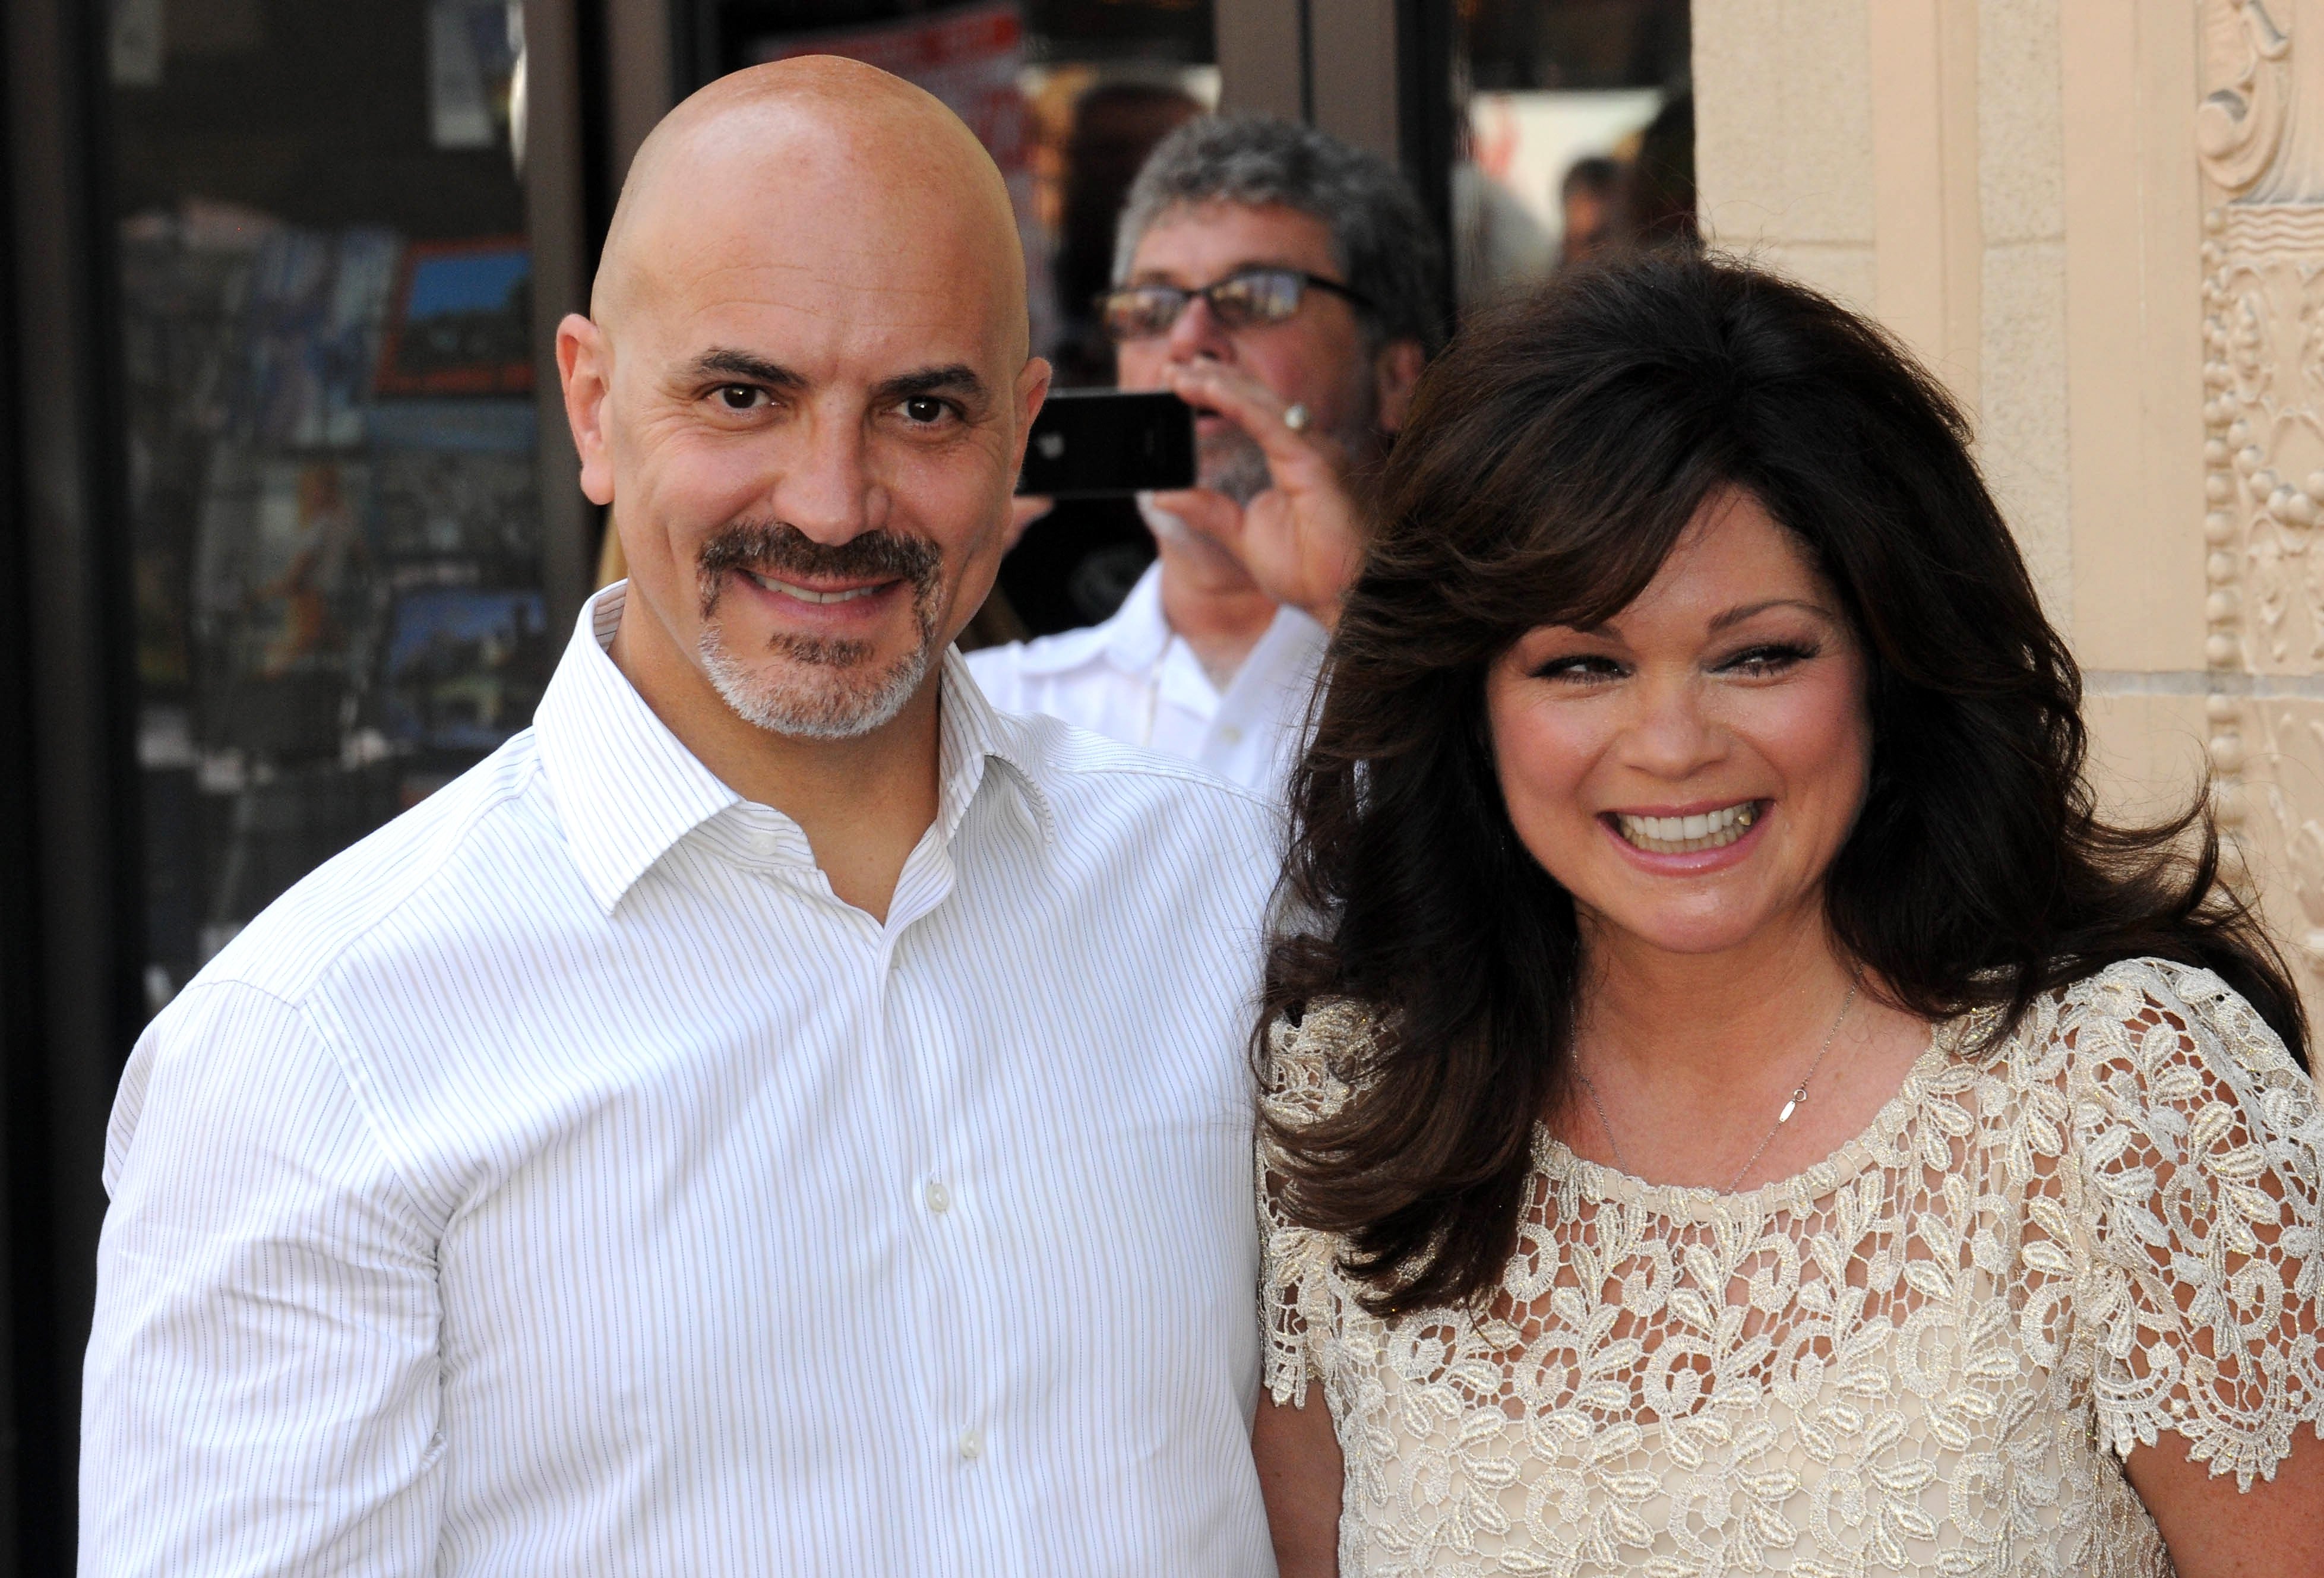 Tom Vitale and Valerie Bertinelli participate in the Hollywood Walk of Fame Star ceremony honoring Bertinelli on August 22, 2012, in Hollywood, California | Source: Getty Images